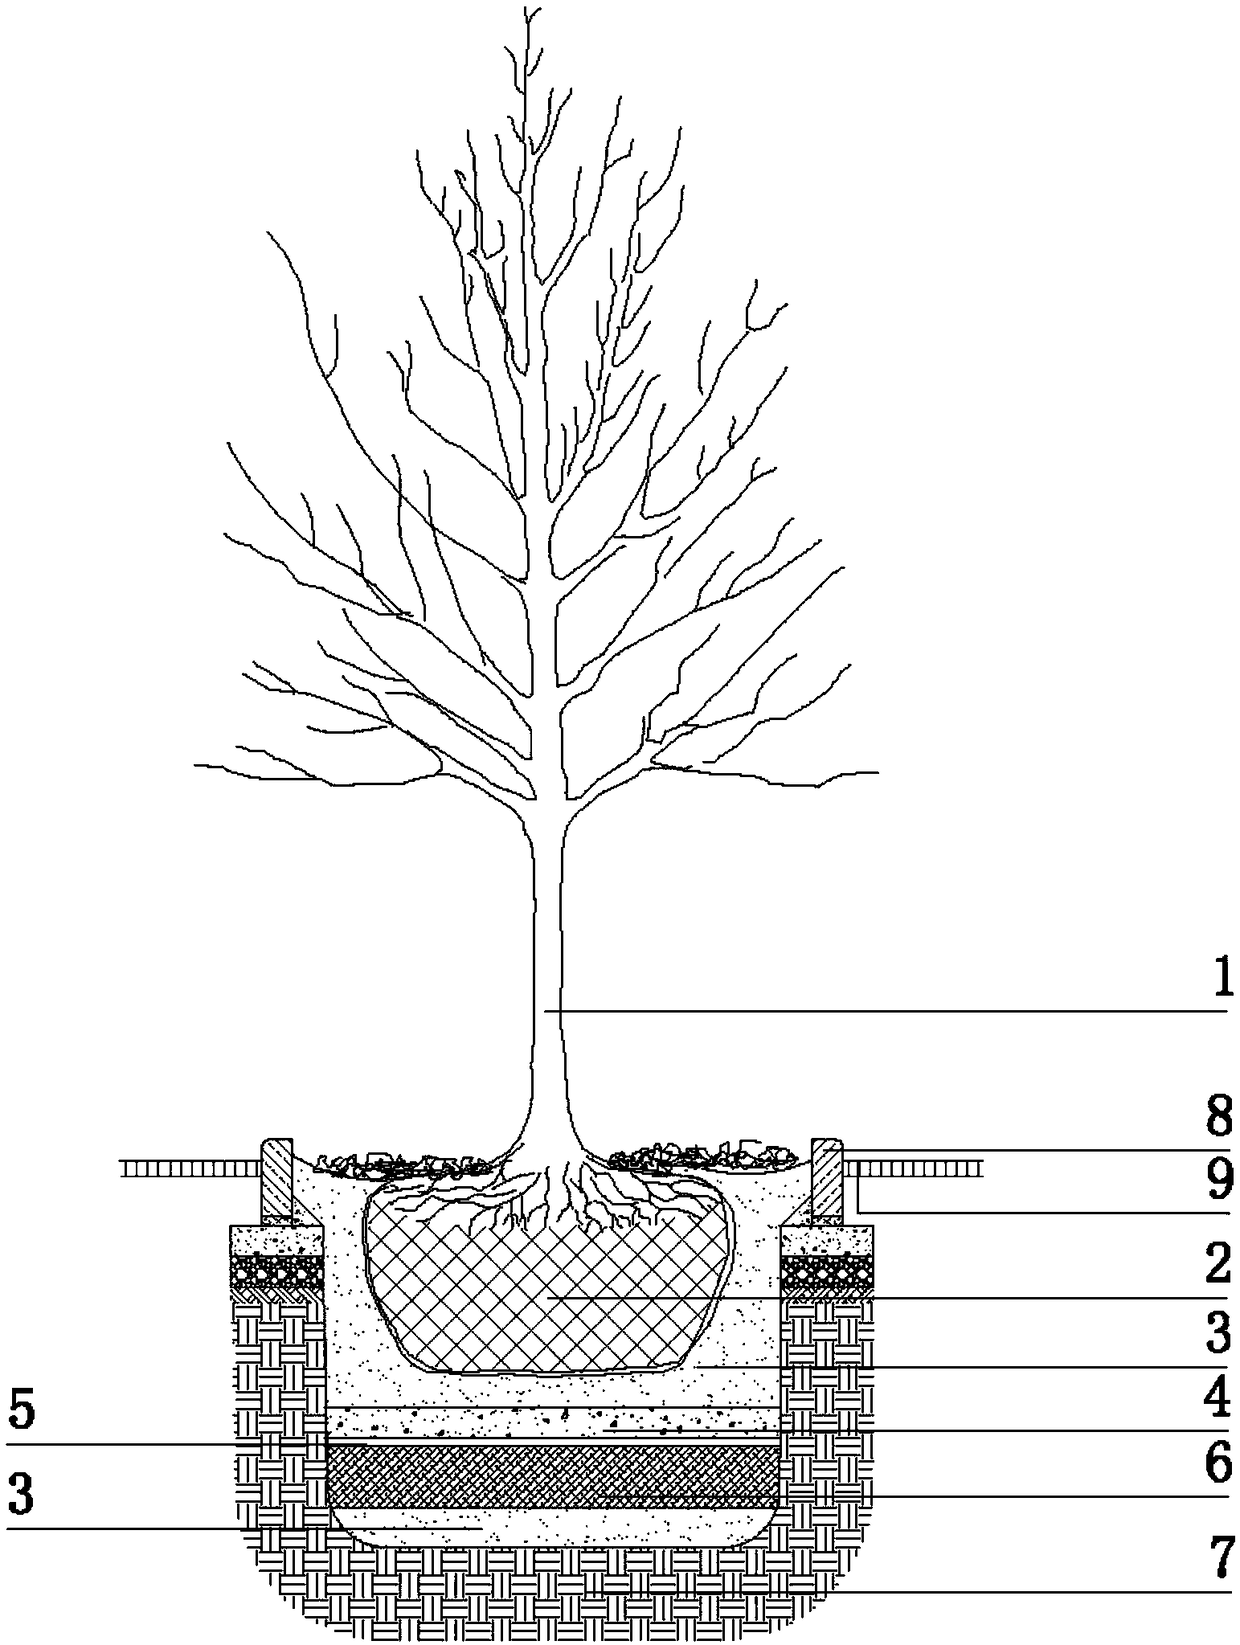 Ecological planting bed to prevent plants from damaging peripheral structural layer during growth